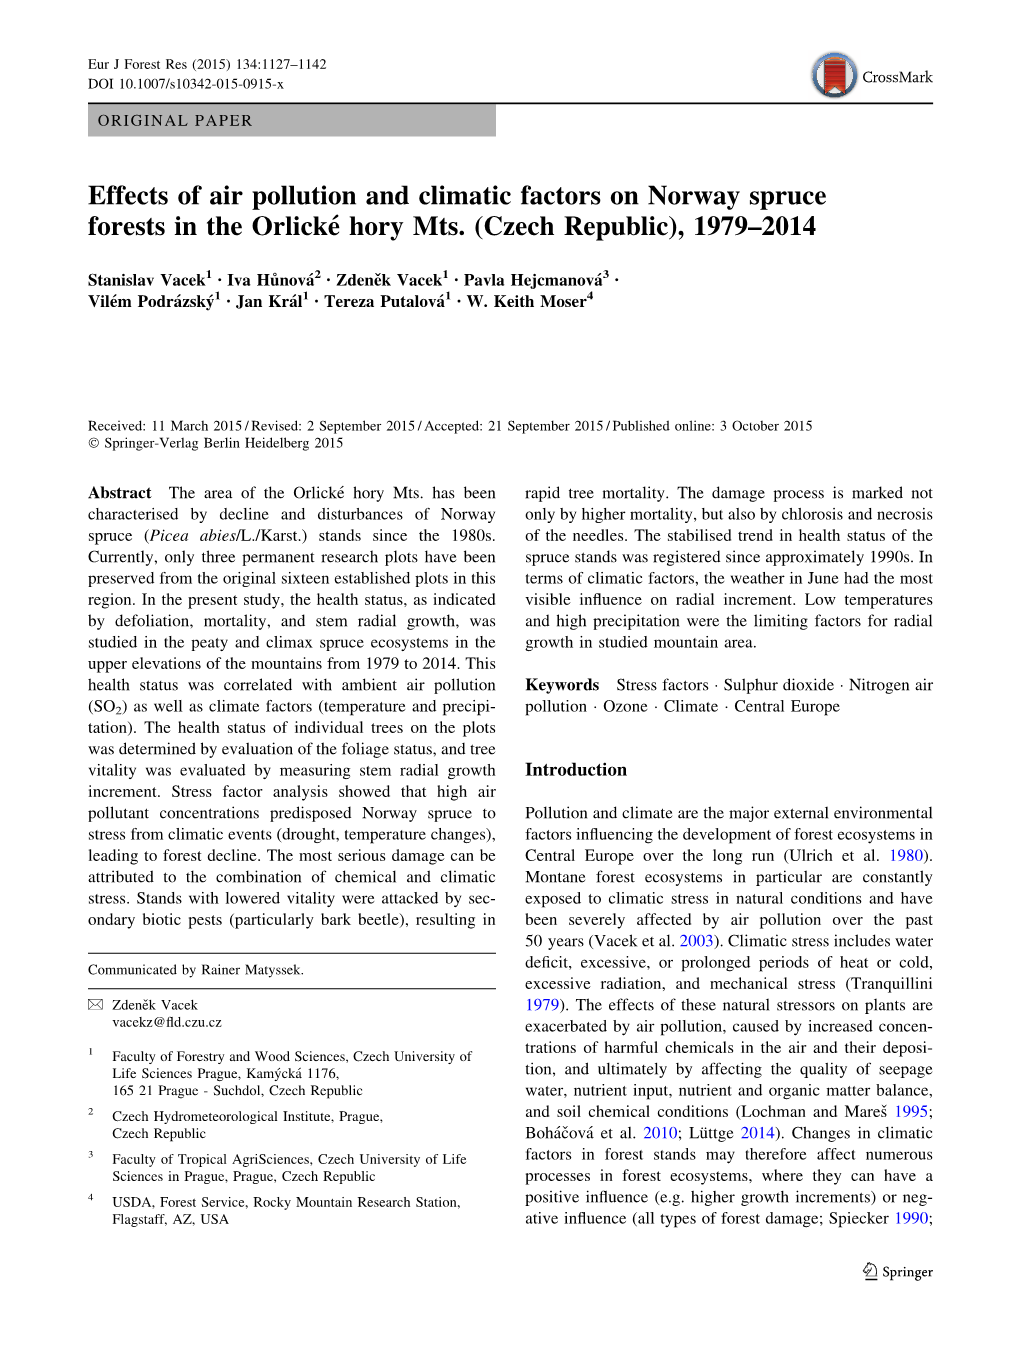 Effects of Air Pollution and Climatic Factors on Norway Spruce Forests in the Orlické Hory Mts